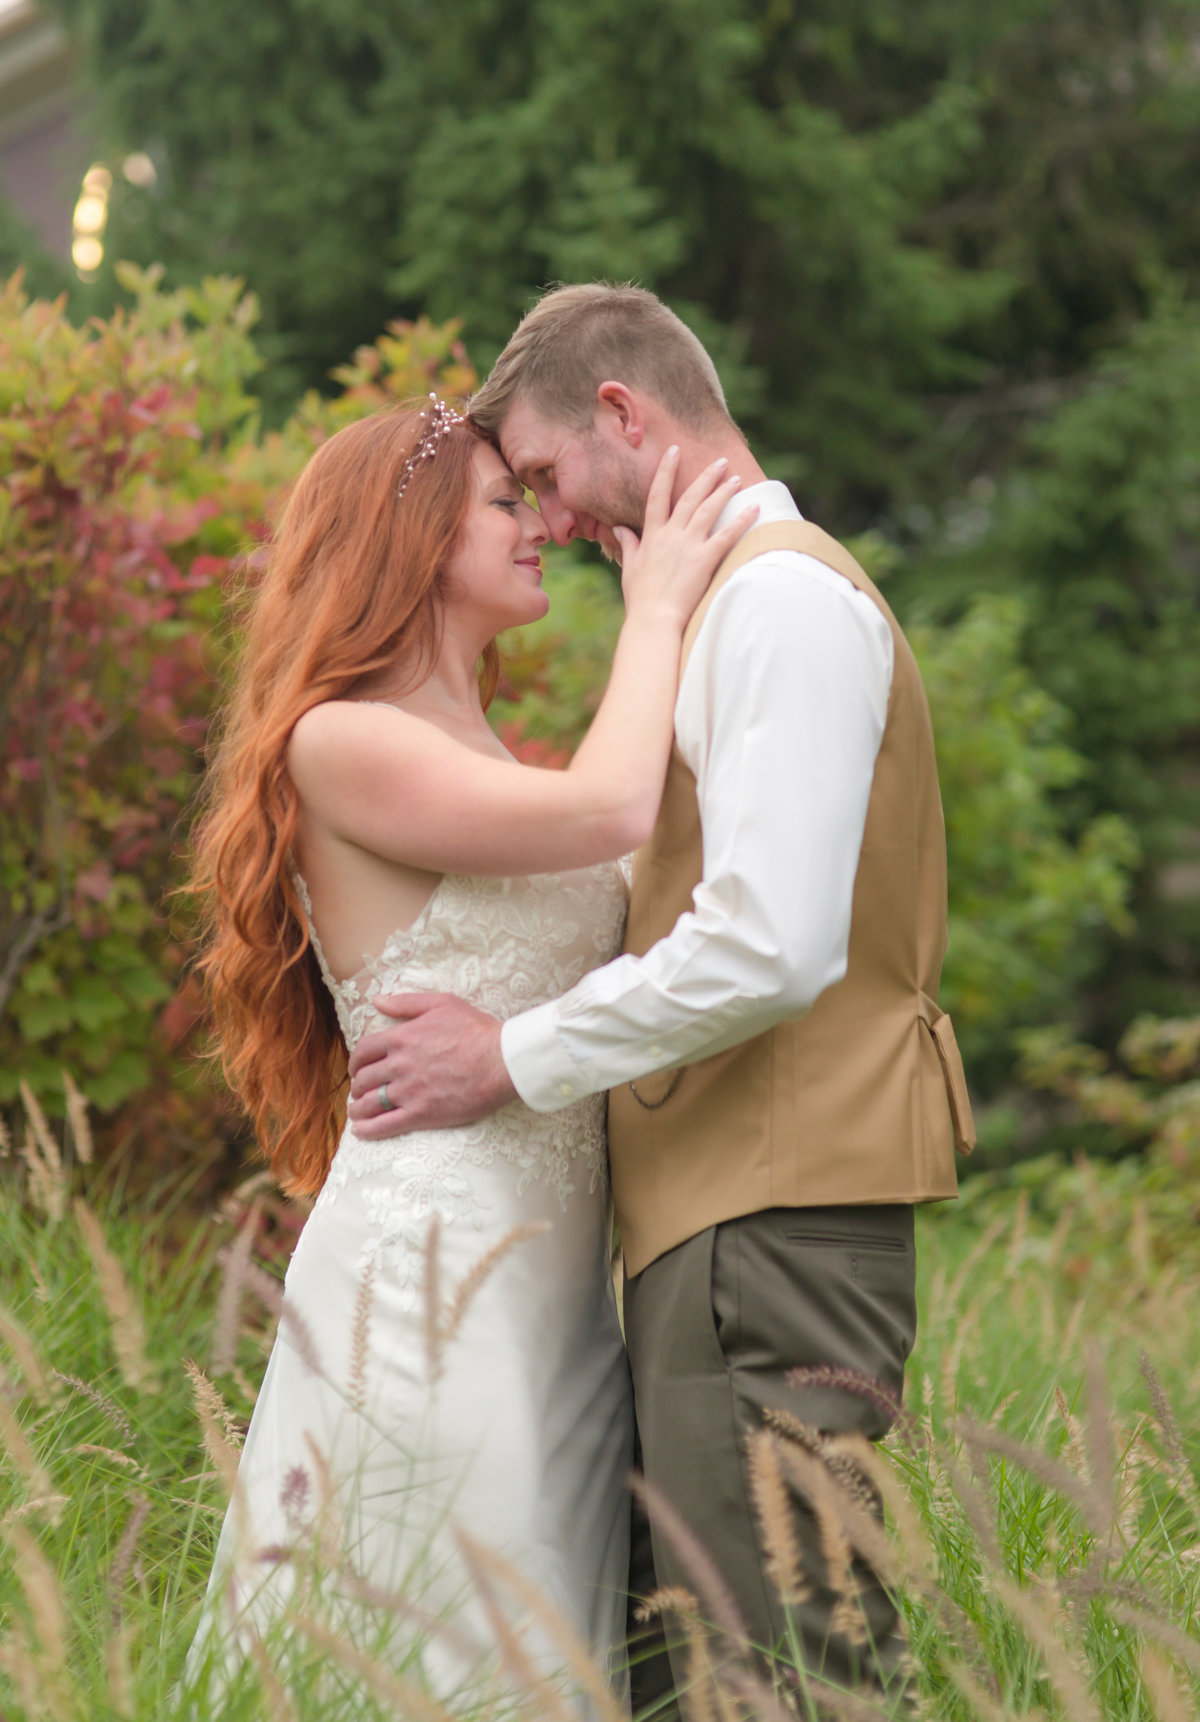 Morgean + Greg | Oden and Janelle Photography 2016 |JJH_7100|5